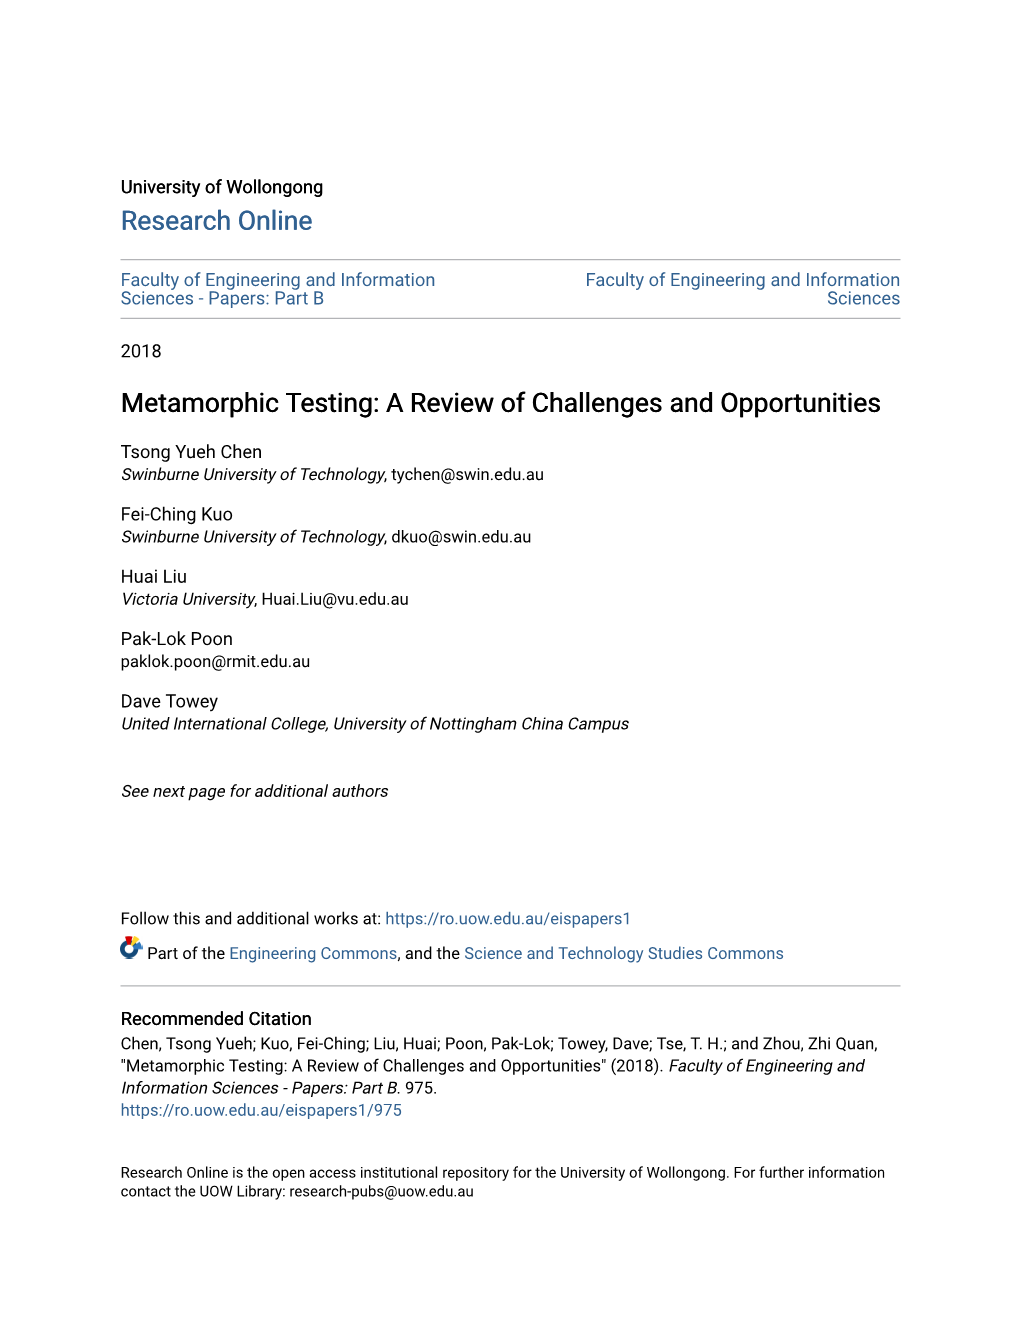 Metamorphic Testing: a Review of Challenges and Opportunities